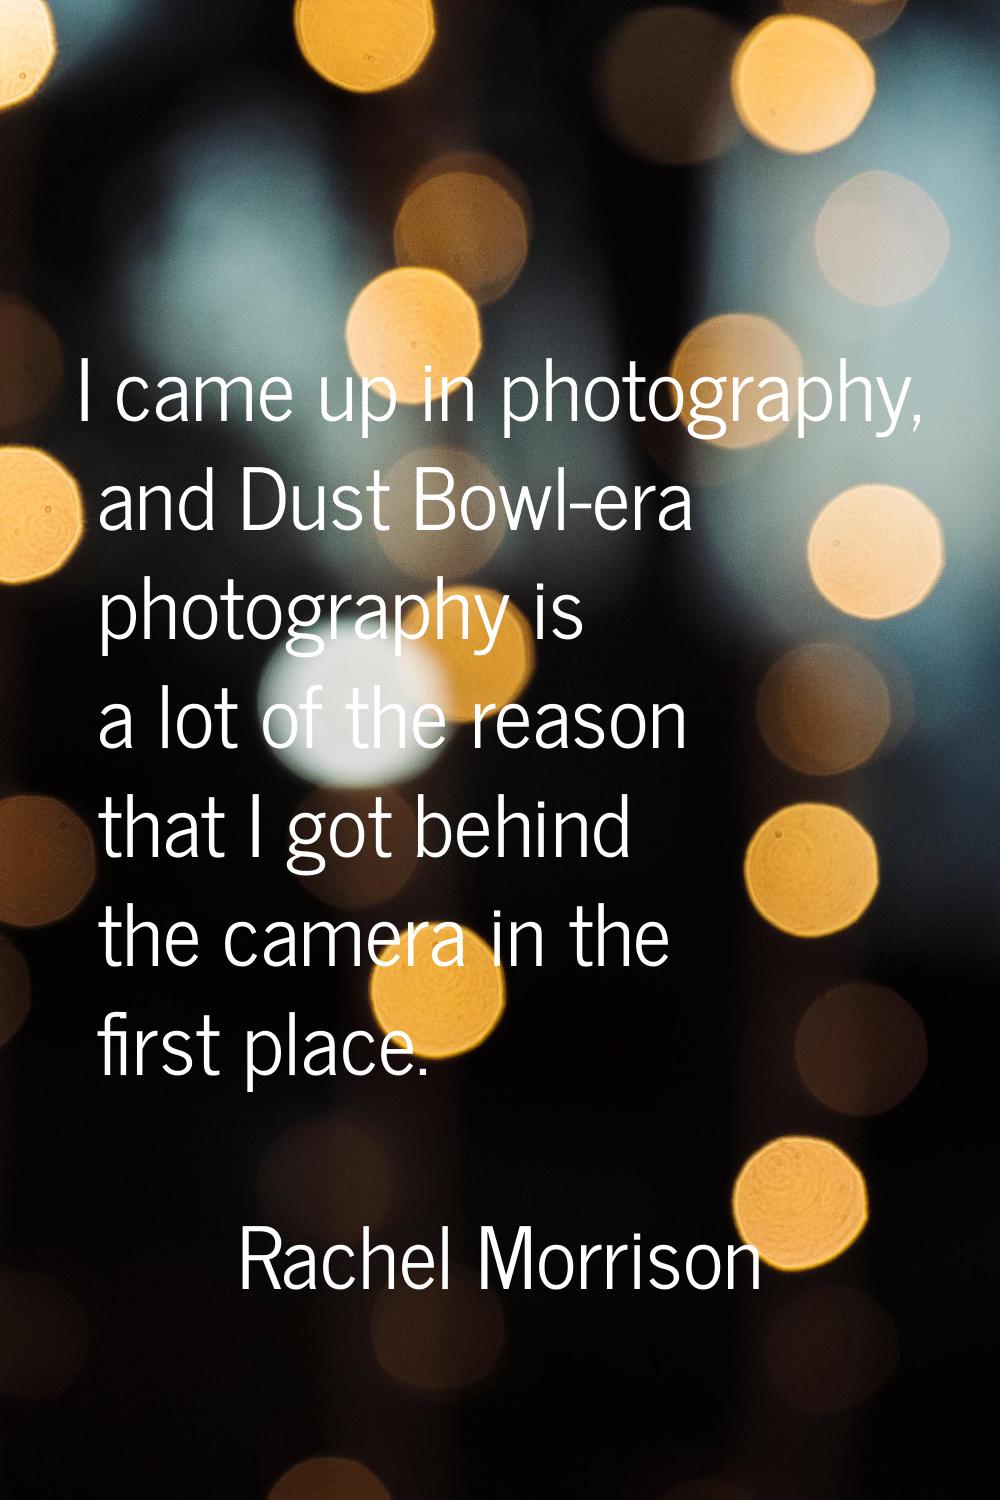 I came up in photography, and Dust Bowl-era photography is a lot of the reason that I got behind th